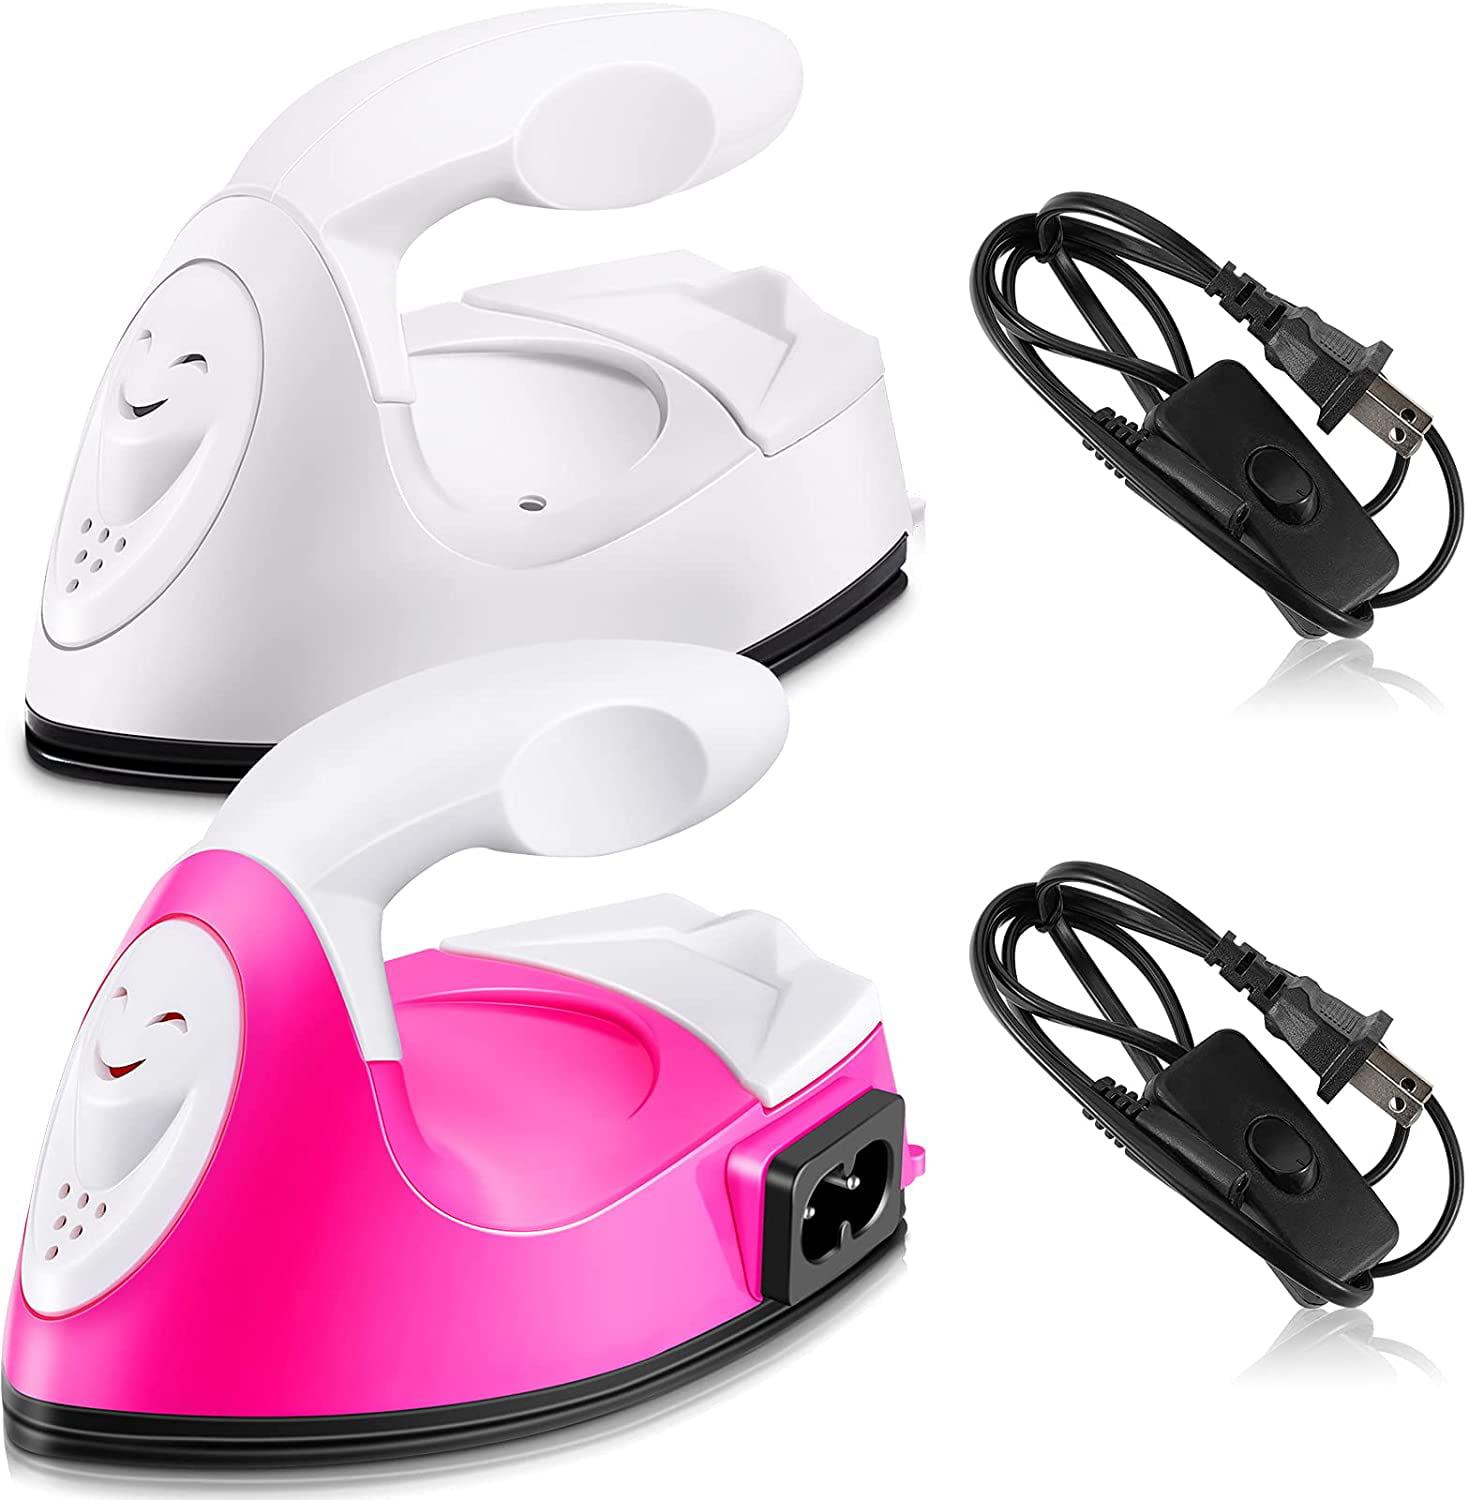 2 Pieces Mini Craft Iron Mini Heat Press Mini Iron Portable Handy Heat Press with Charging Base Accessories for DIY T-Shirts Shoes Hats Small Heat Transfer Vinyl Projects Pink, Blue 